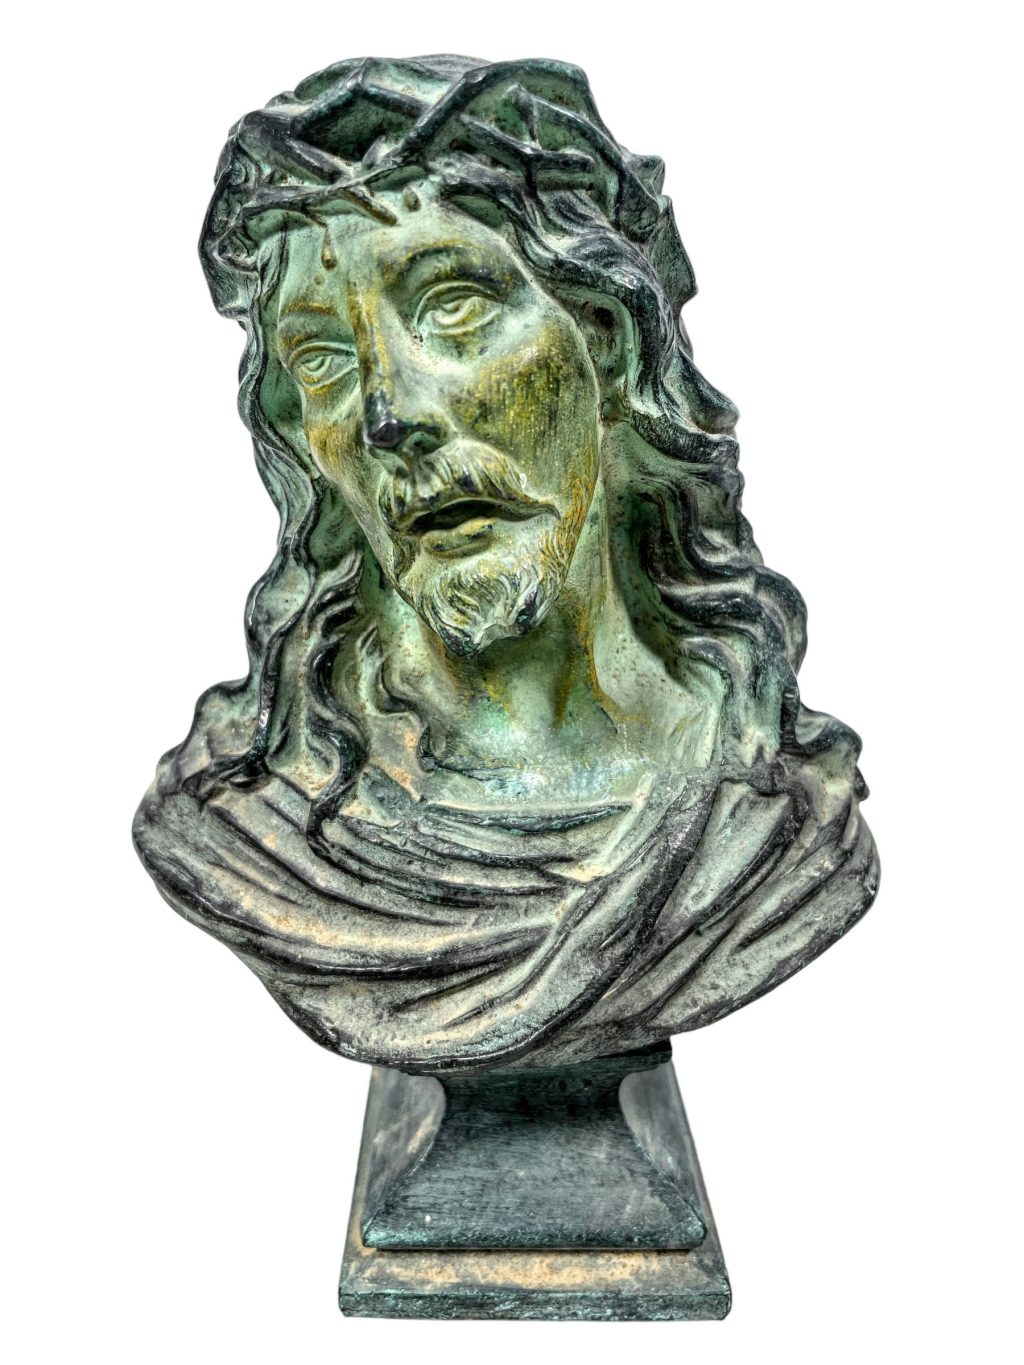 Vintage French Pewter Jesus Crown Of Thorns Bust by Beroude Head Small Ornament Figurine Display Religious Catholic Gift c1930-50’s